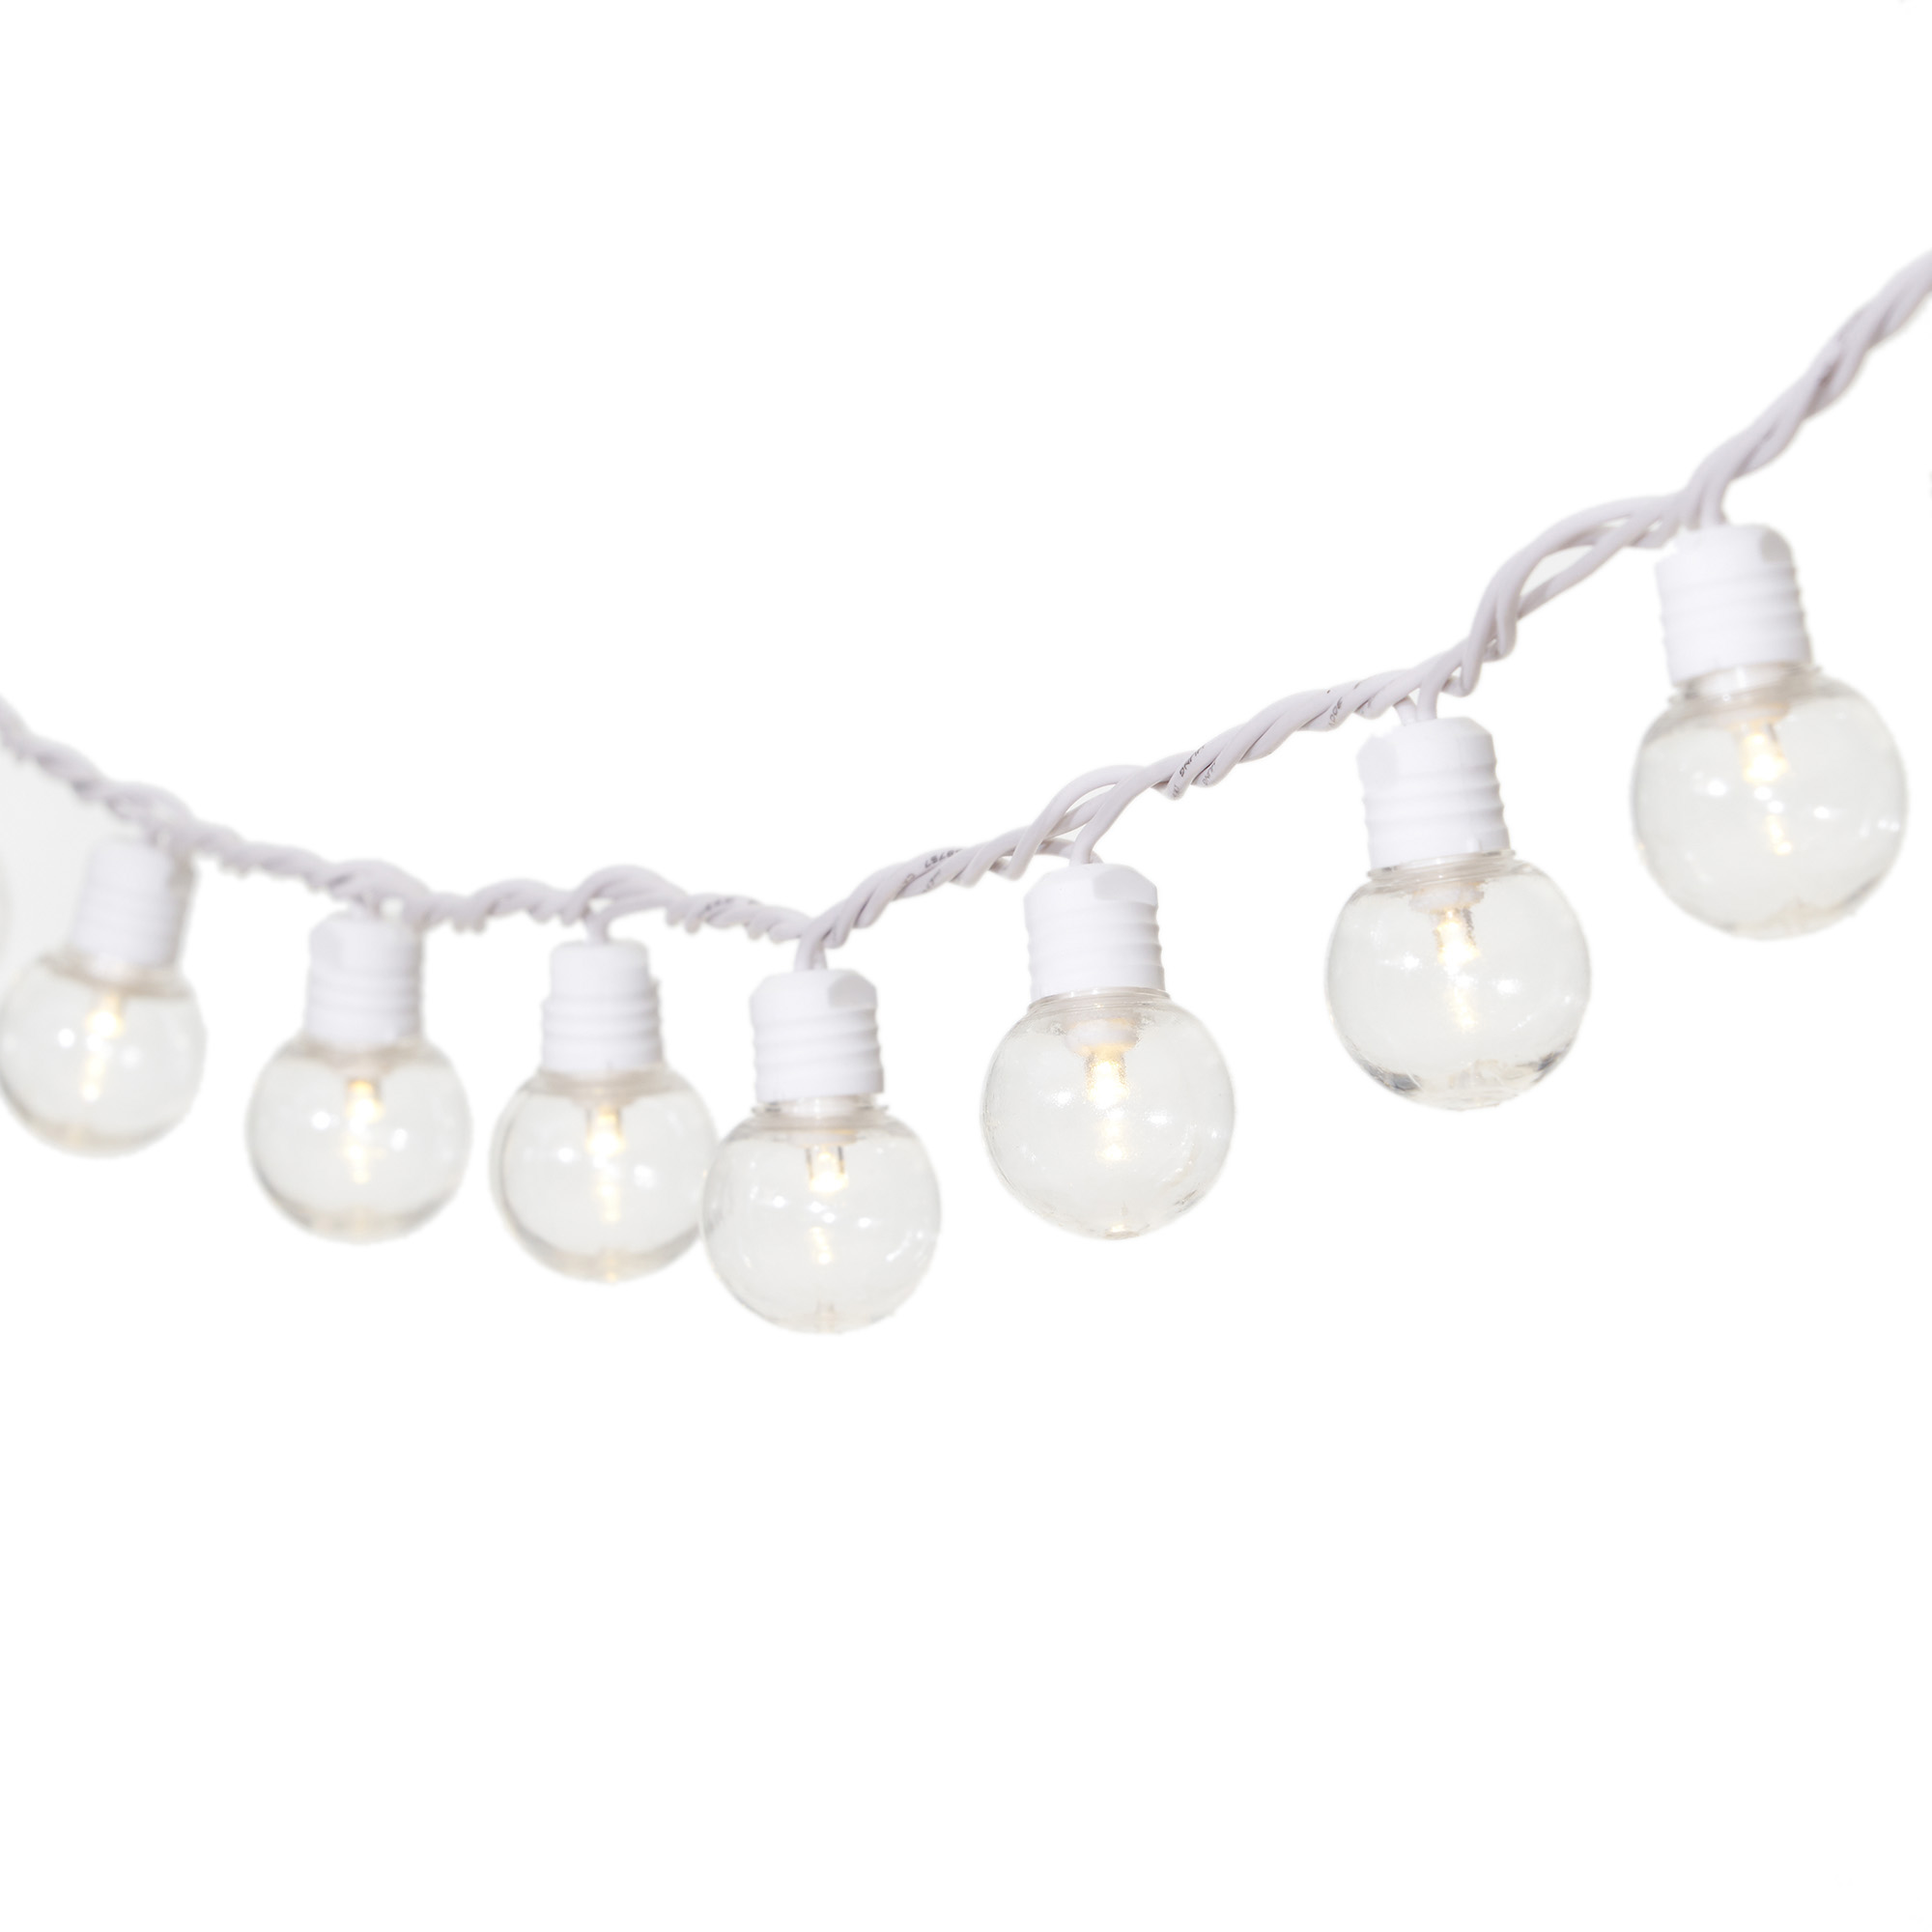 Mainstays 100-Count Plastic LED Globe Outdoor String Lights - image 5 of 9